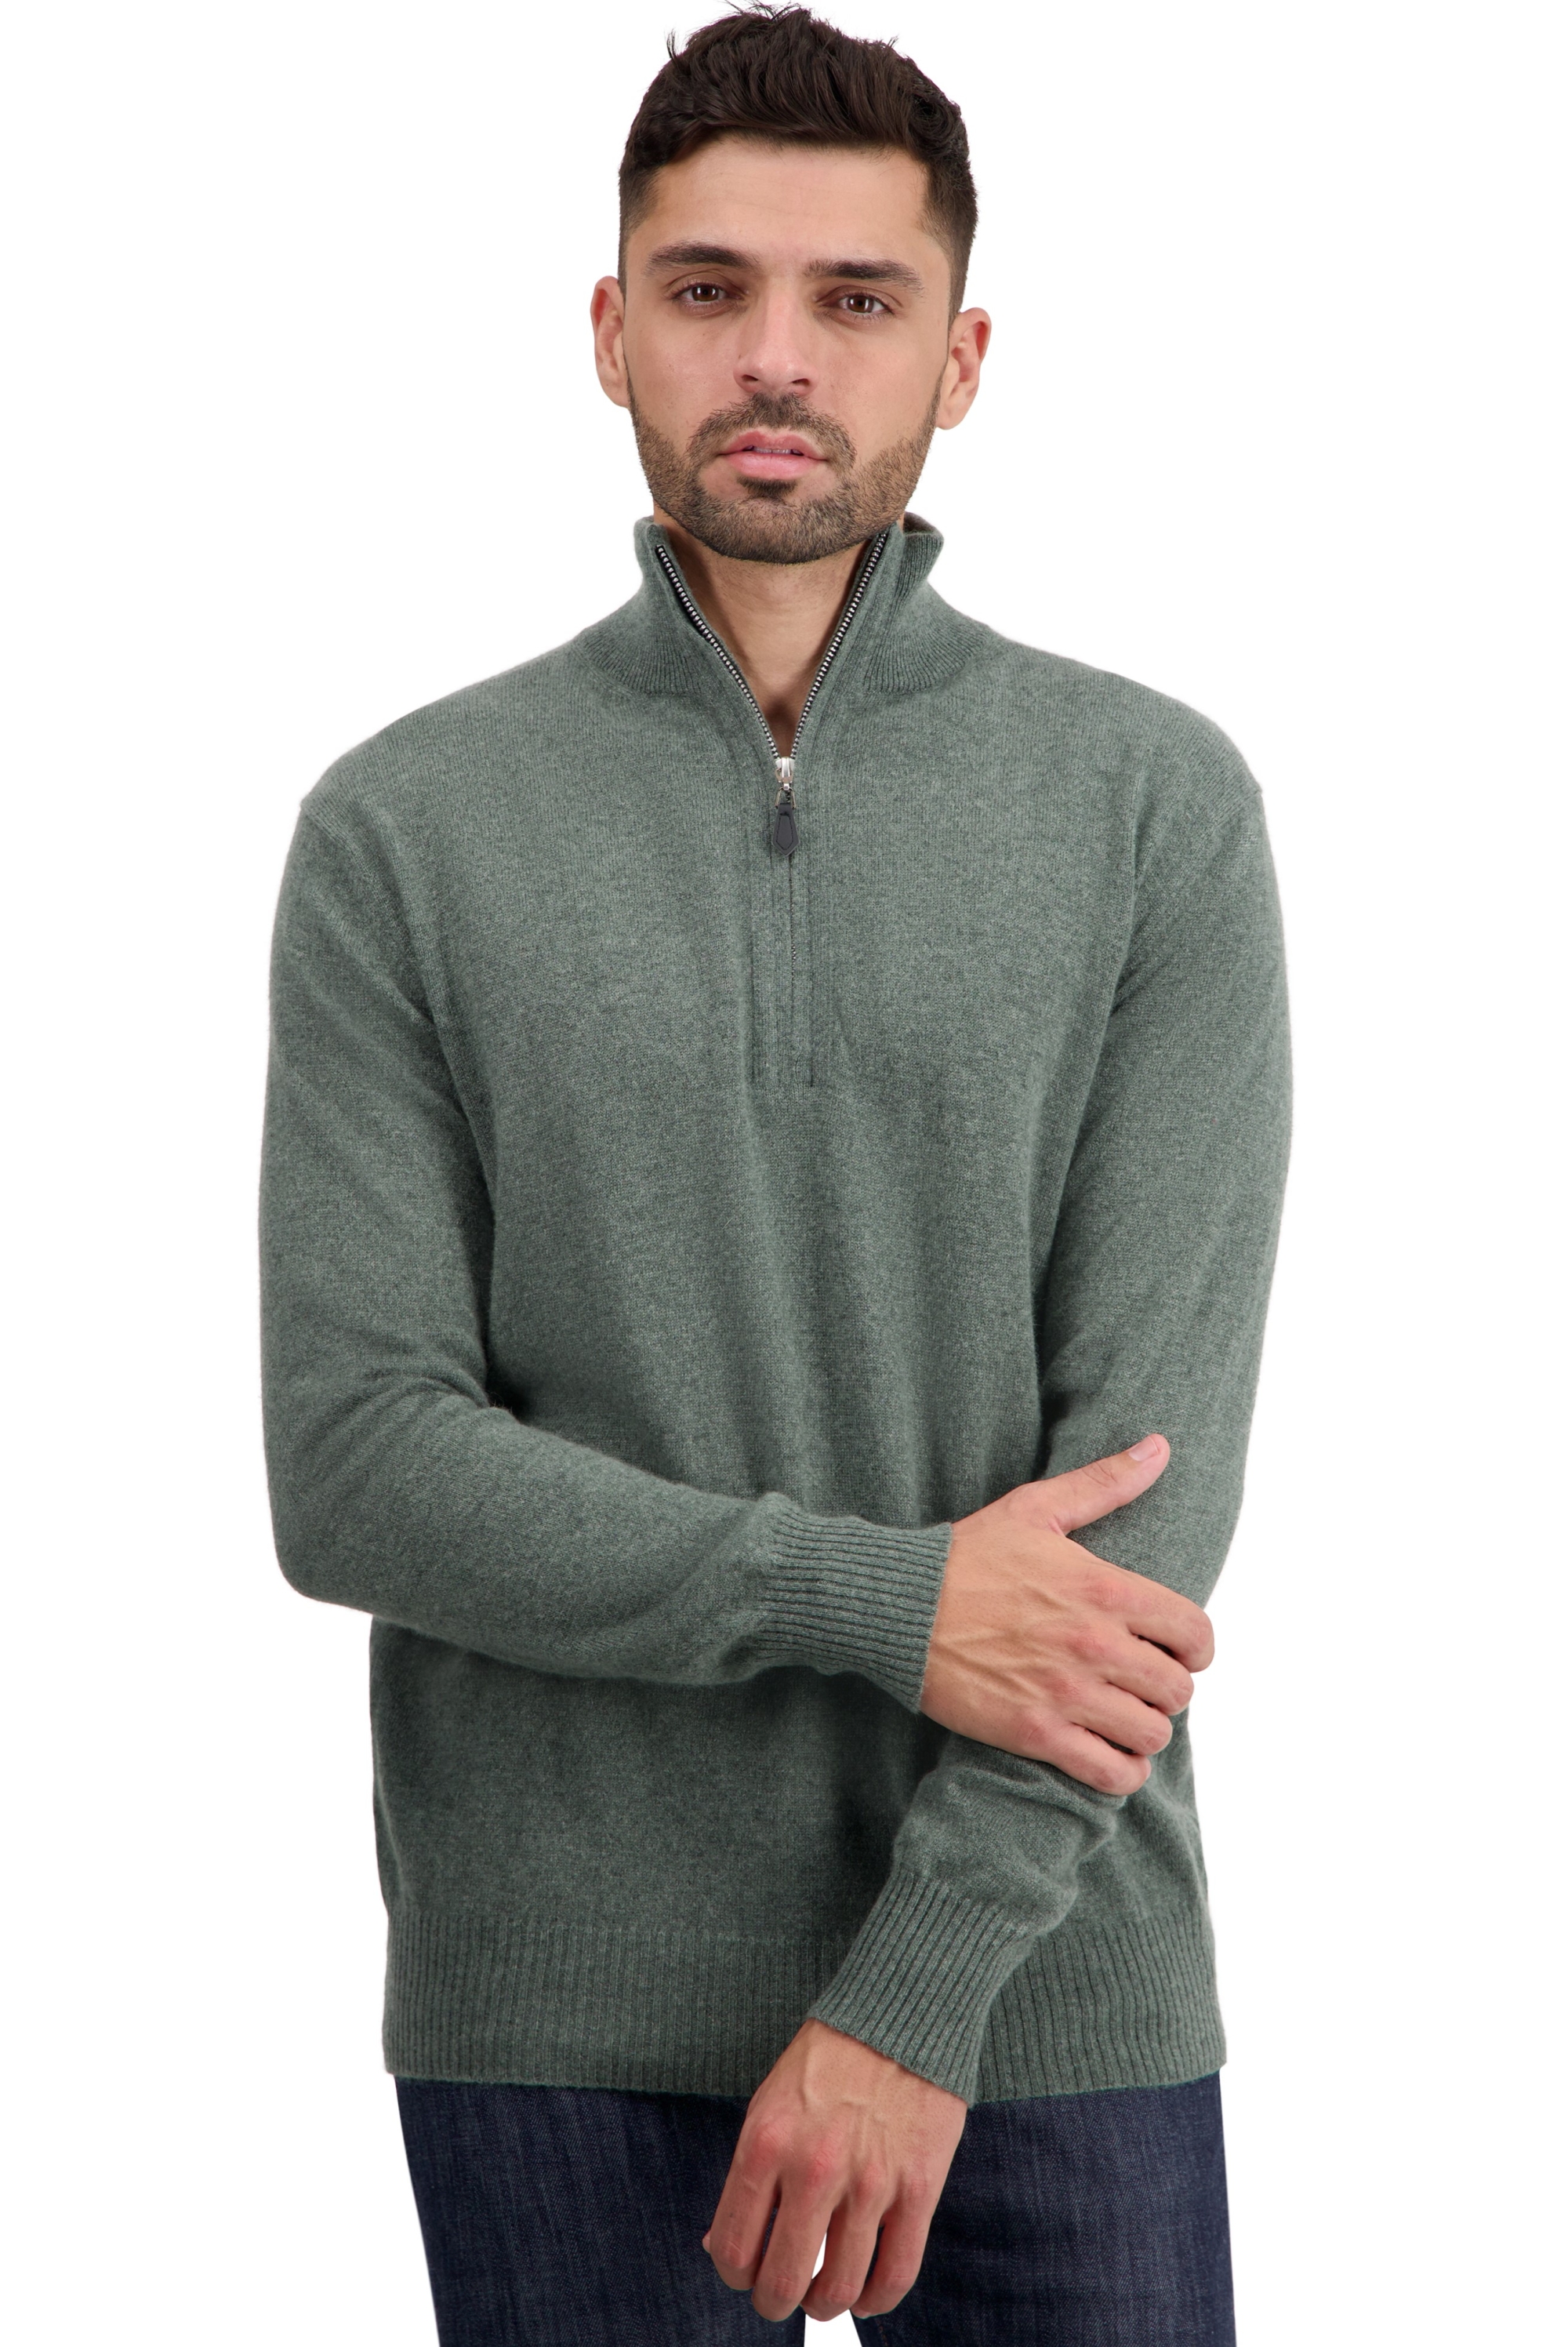 Cashmere men basic sweaters at low prices toulon first military green 3xl